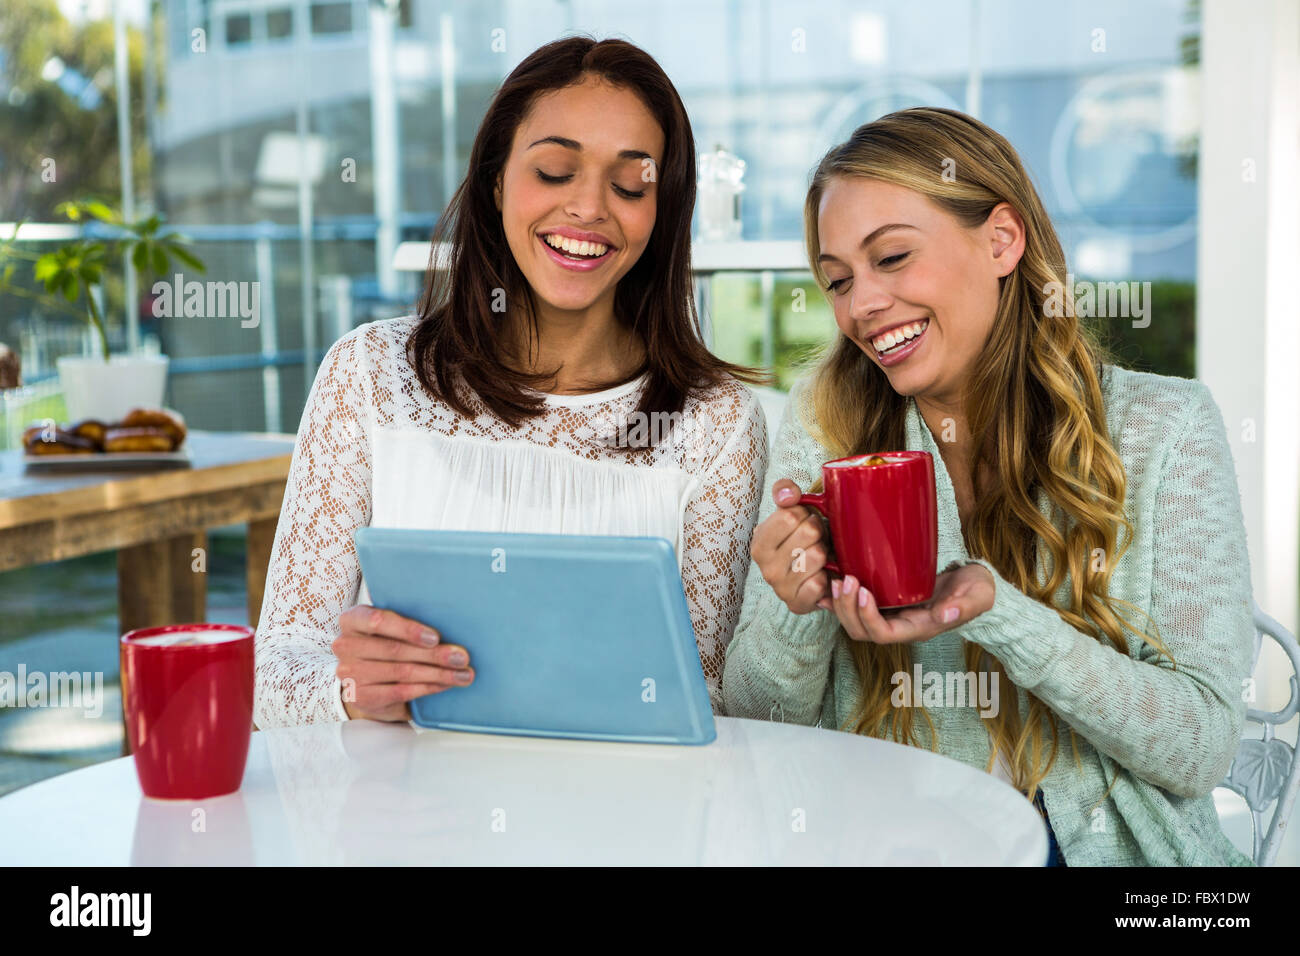 Two girls use a tablet Stock Photo